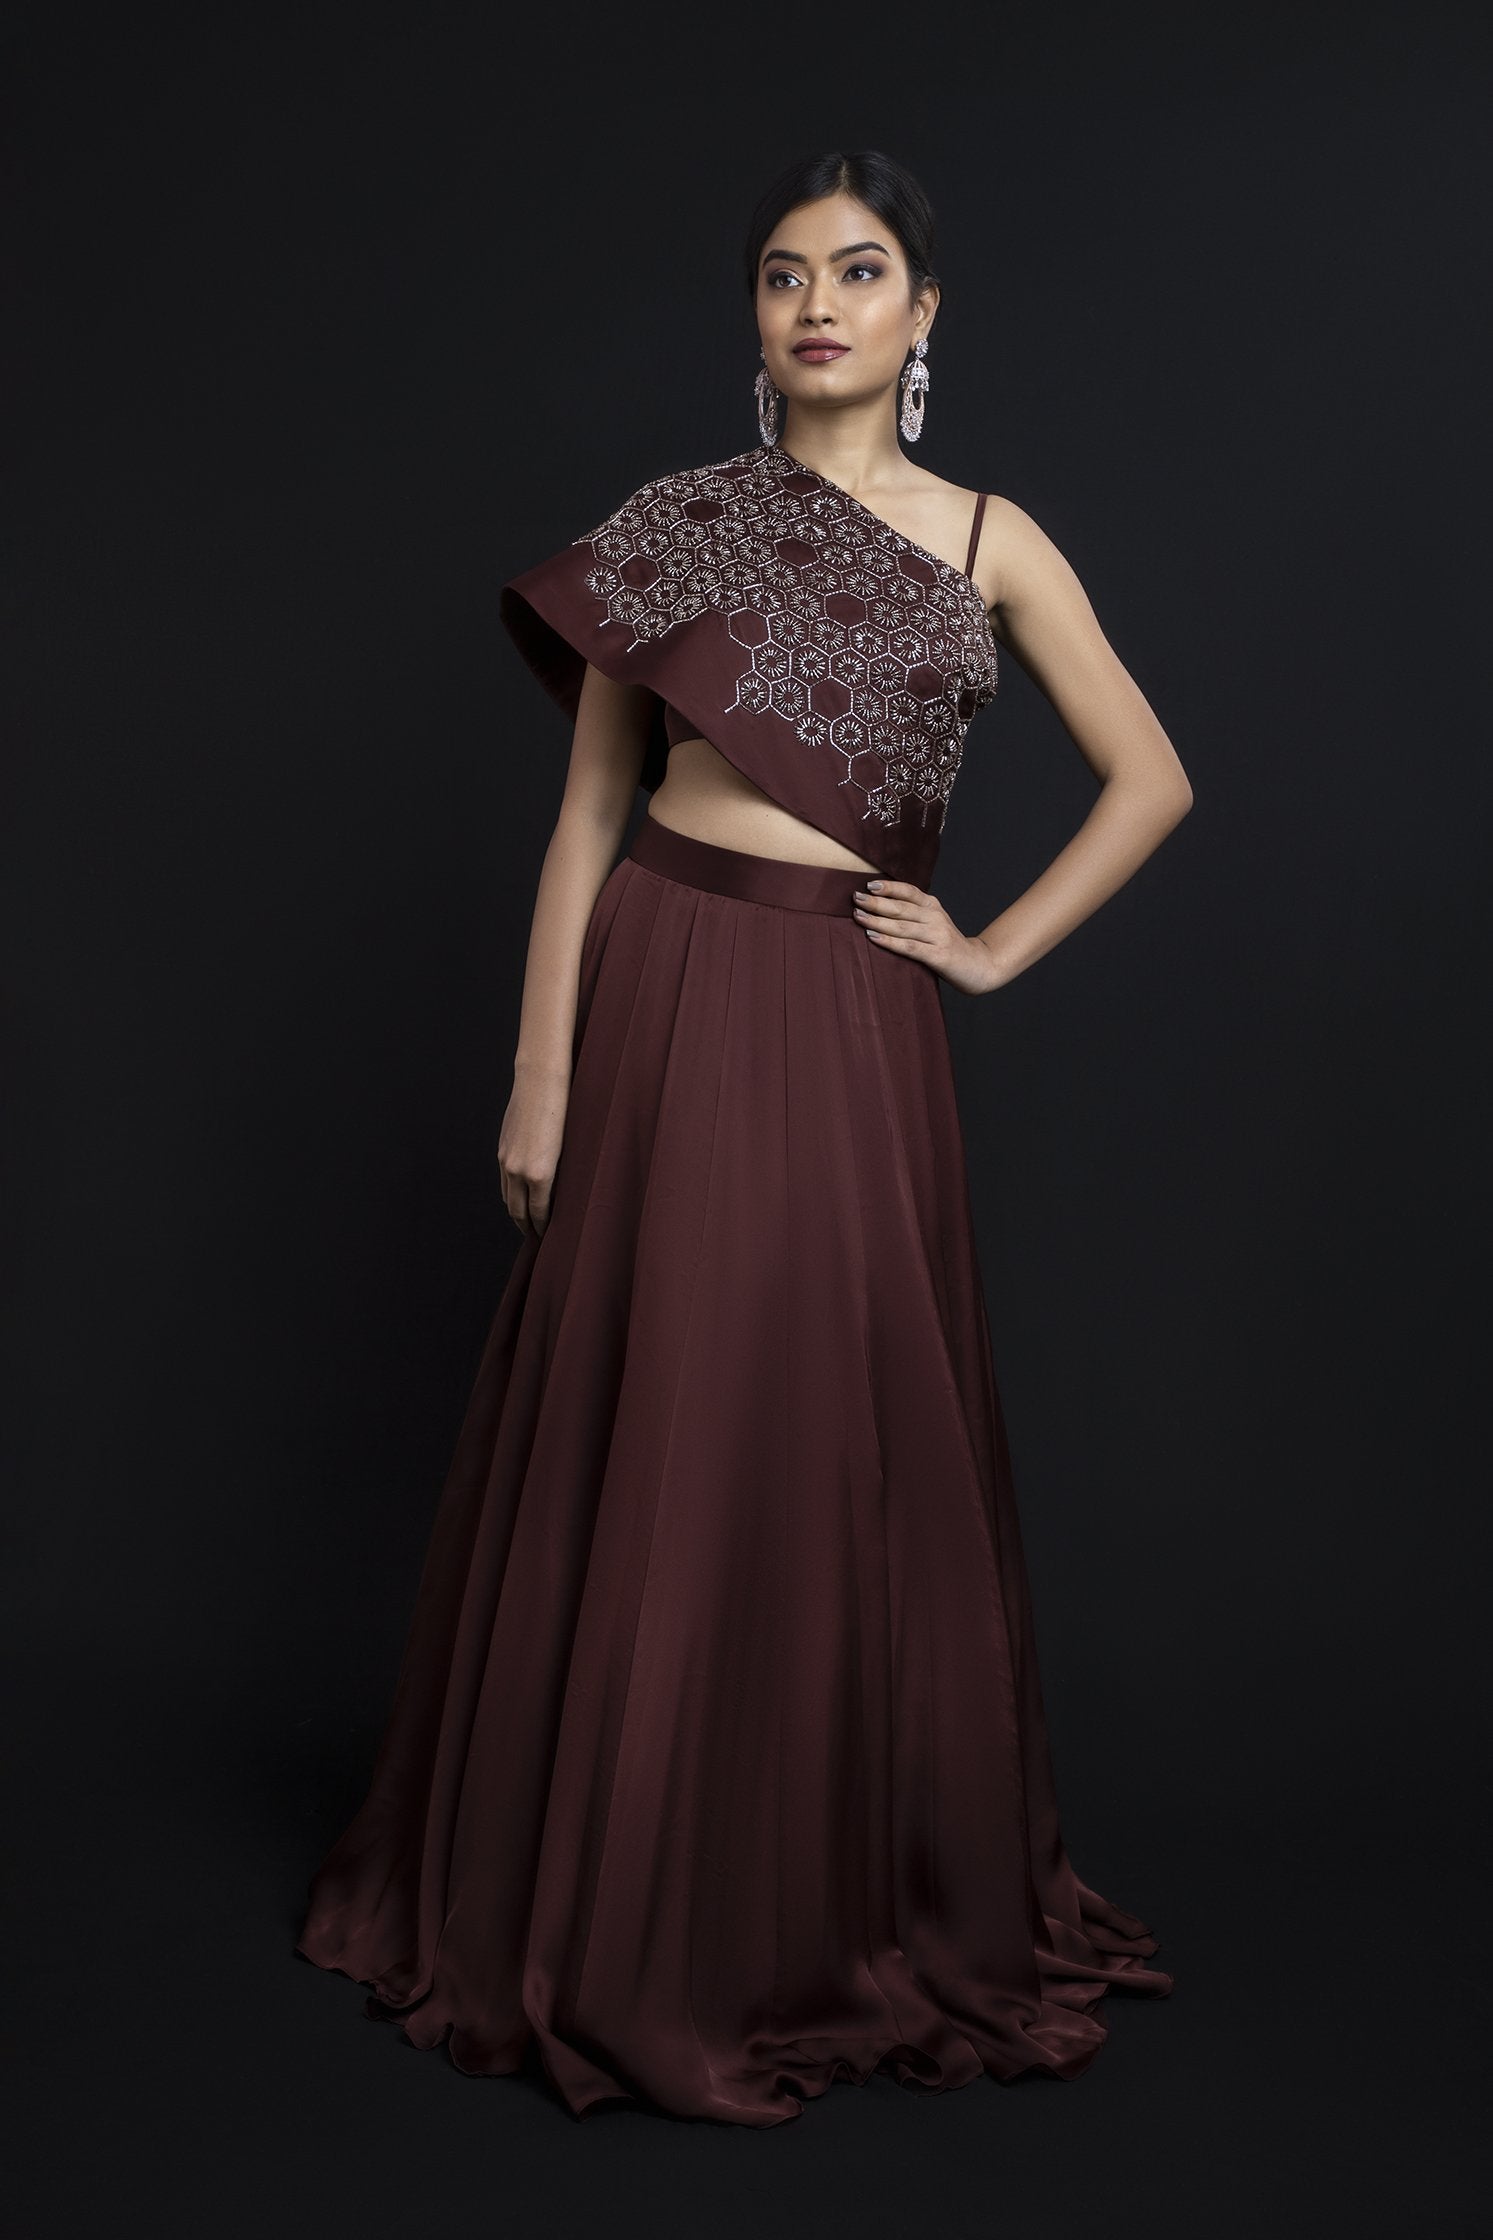 Elegant Chiffon Wedding Skirt and Top with Short Sleeves